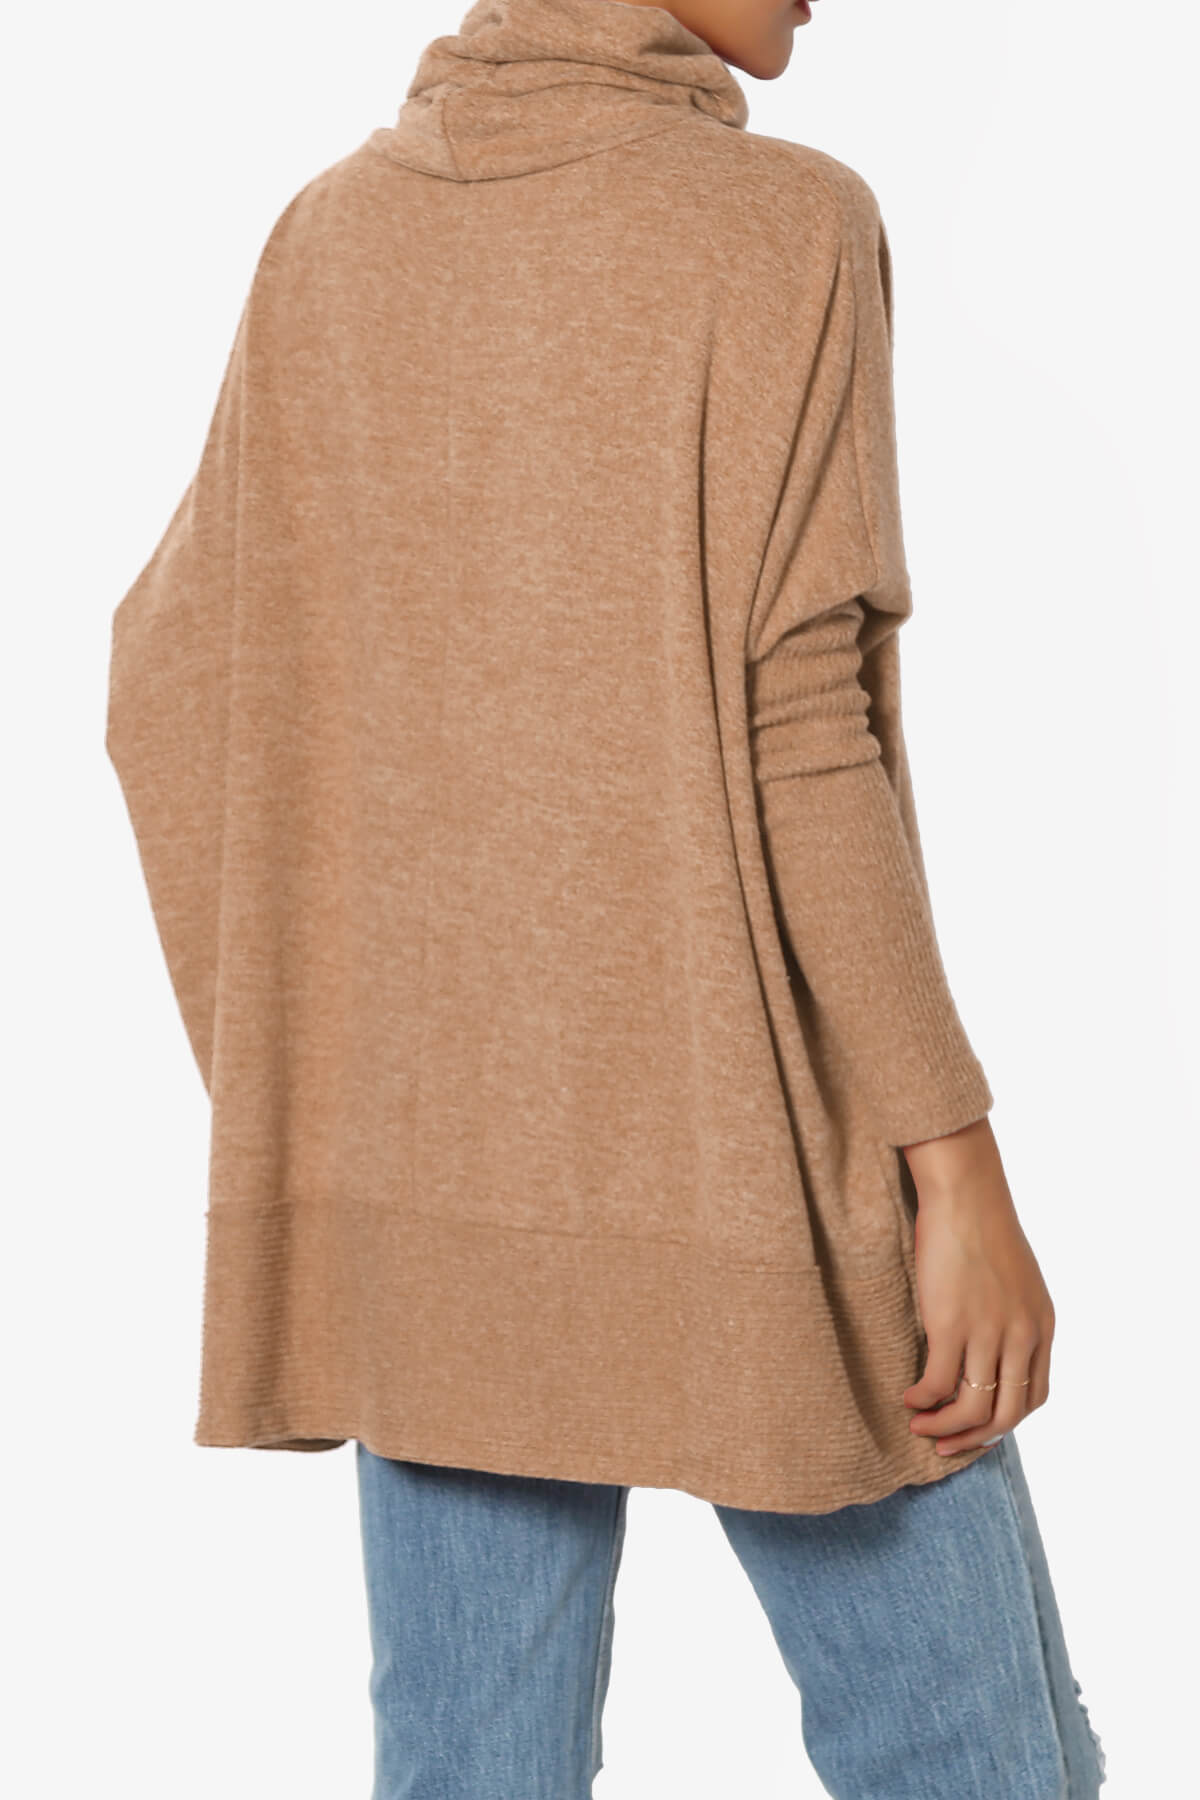 Load image into Gallery viewer, Barclay Cowl Neck Melange Knit Oversized Sweater DEEP CAMEL_4
